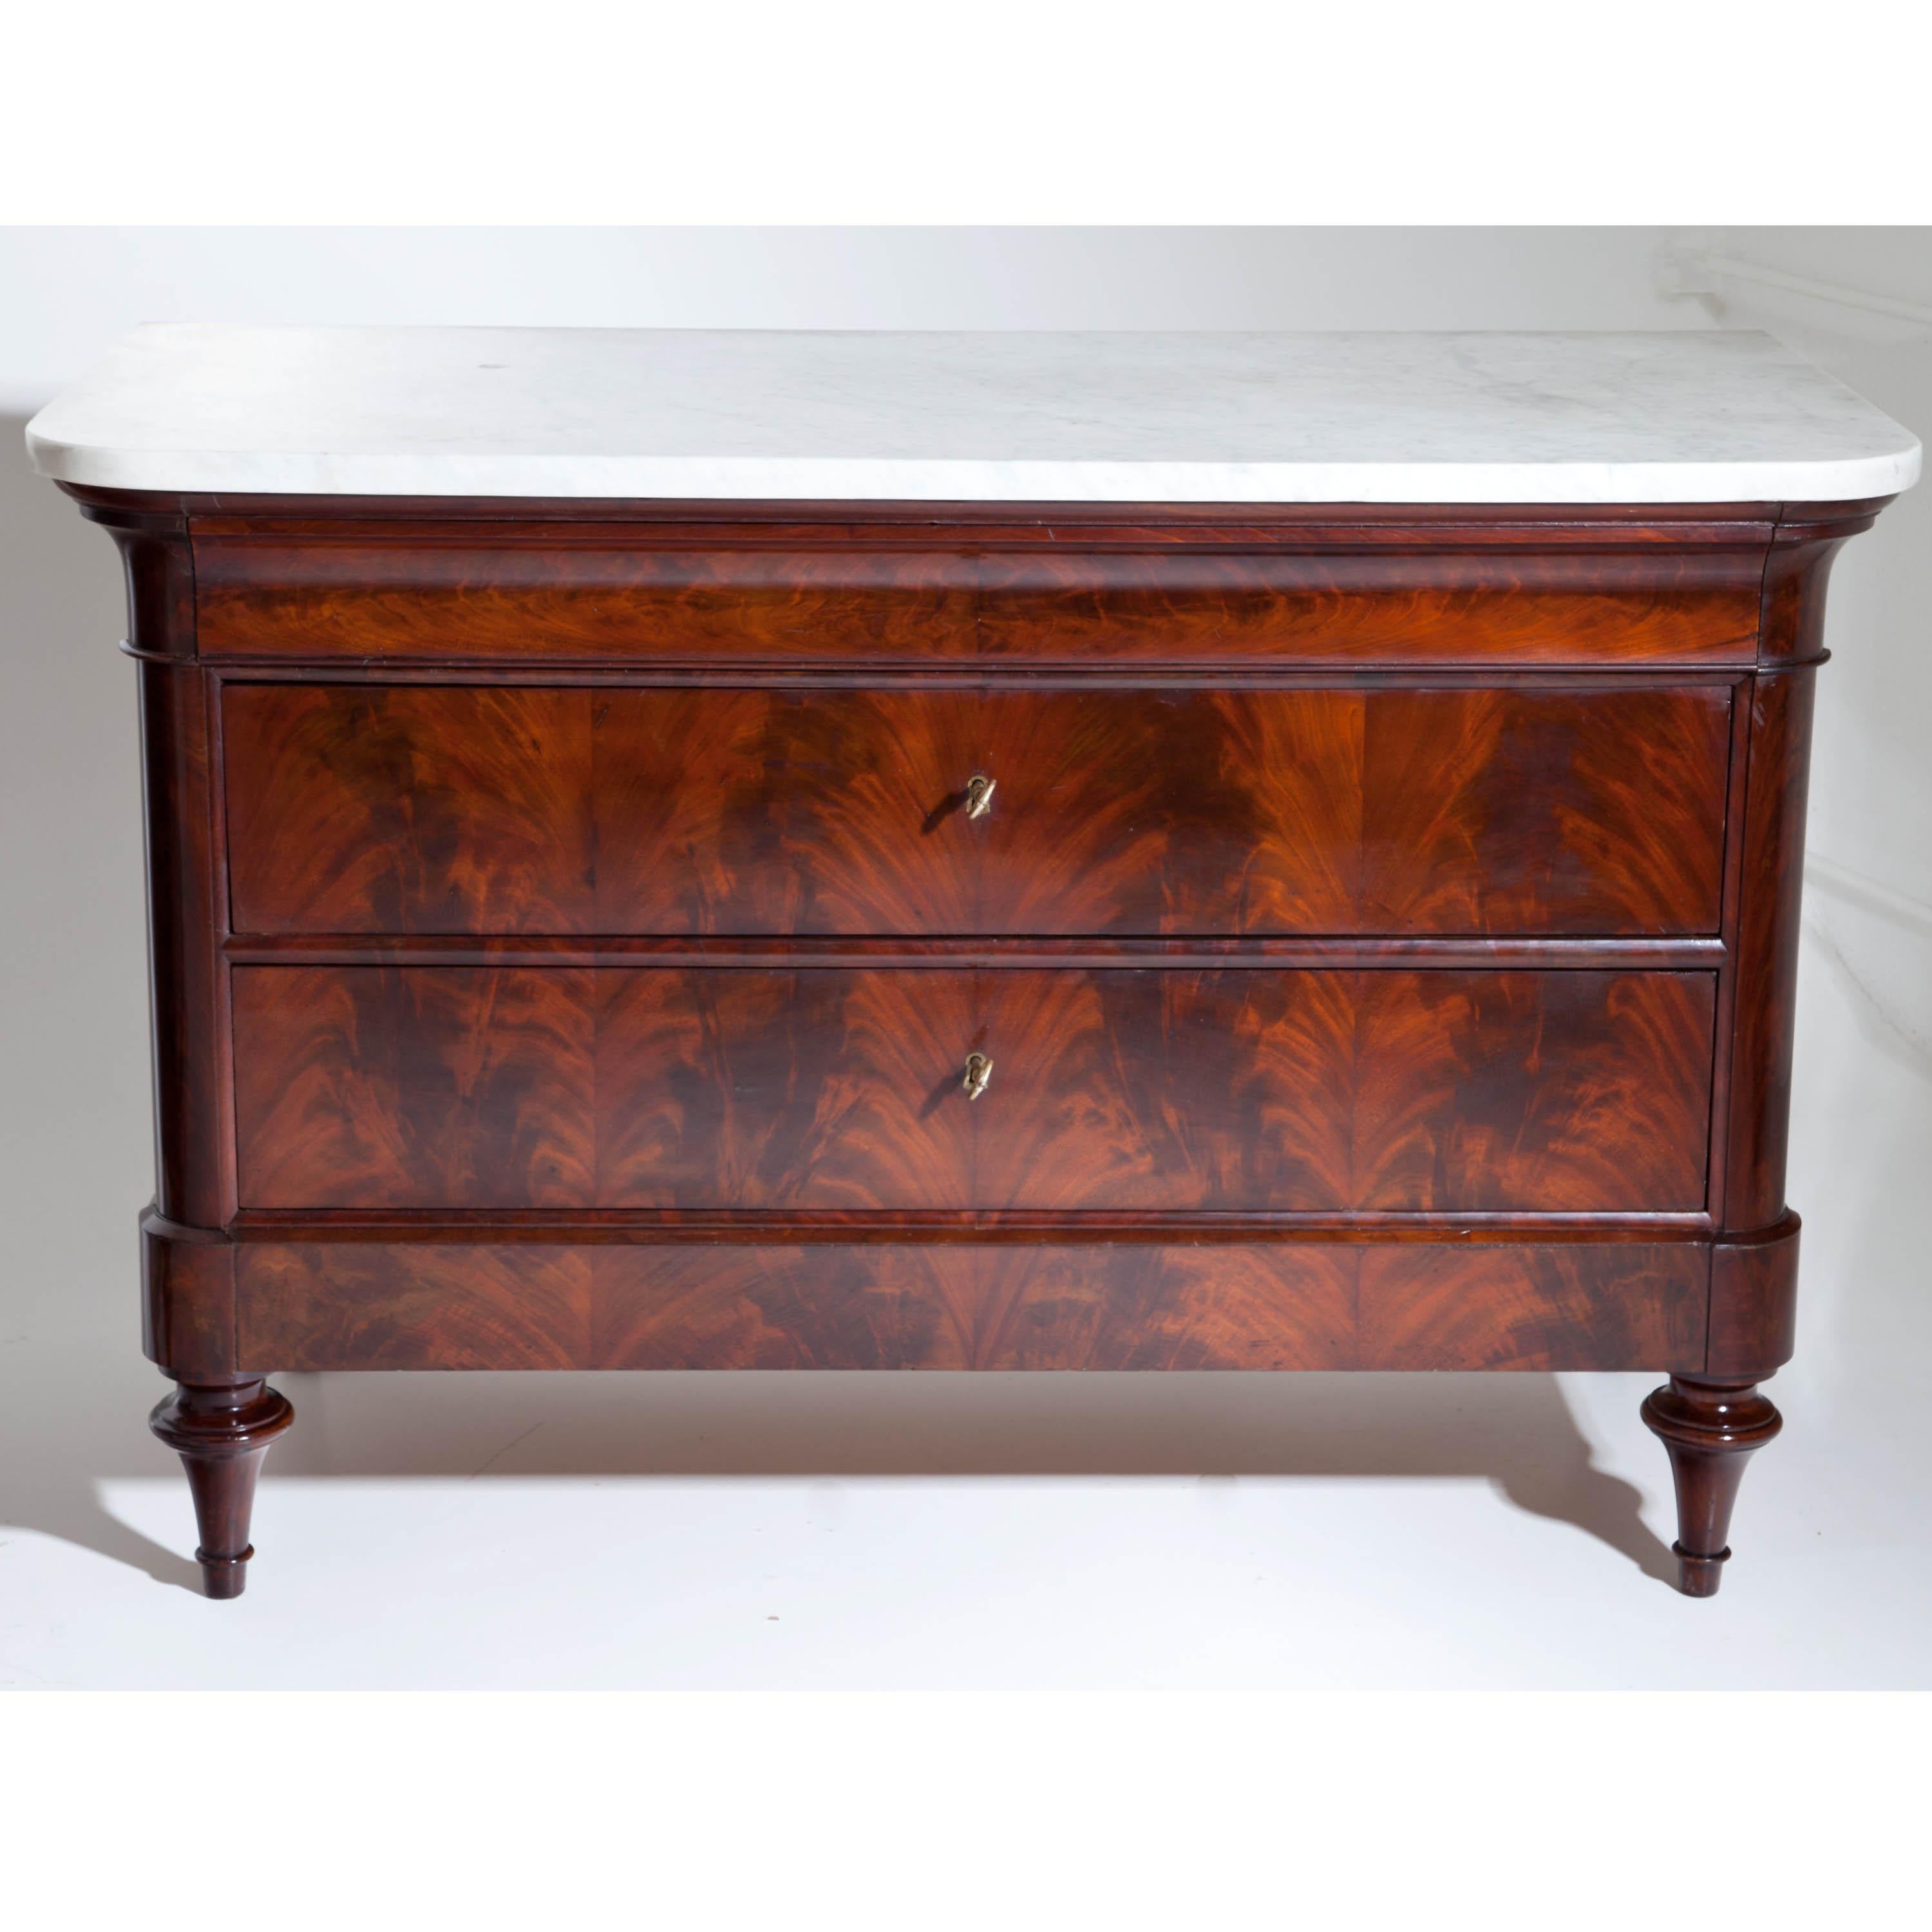 Pair of Louis Philippe chests of drawers on conical feet. The body with rounded corners and three drawers with flamed mahogany veneer and slightly protruding cornice. The tops are white marble.
 